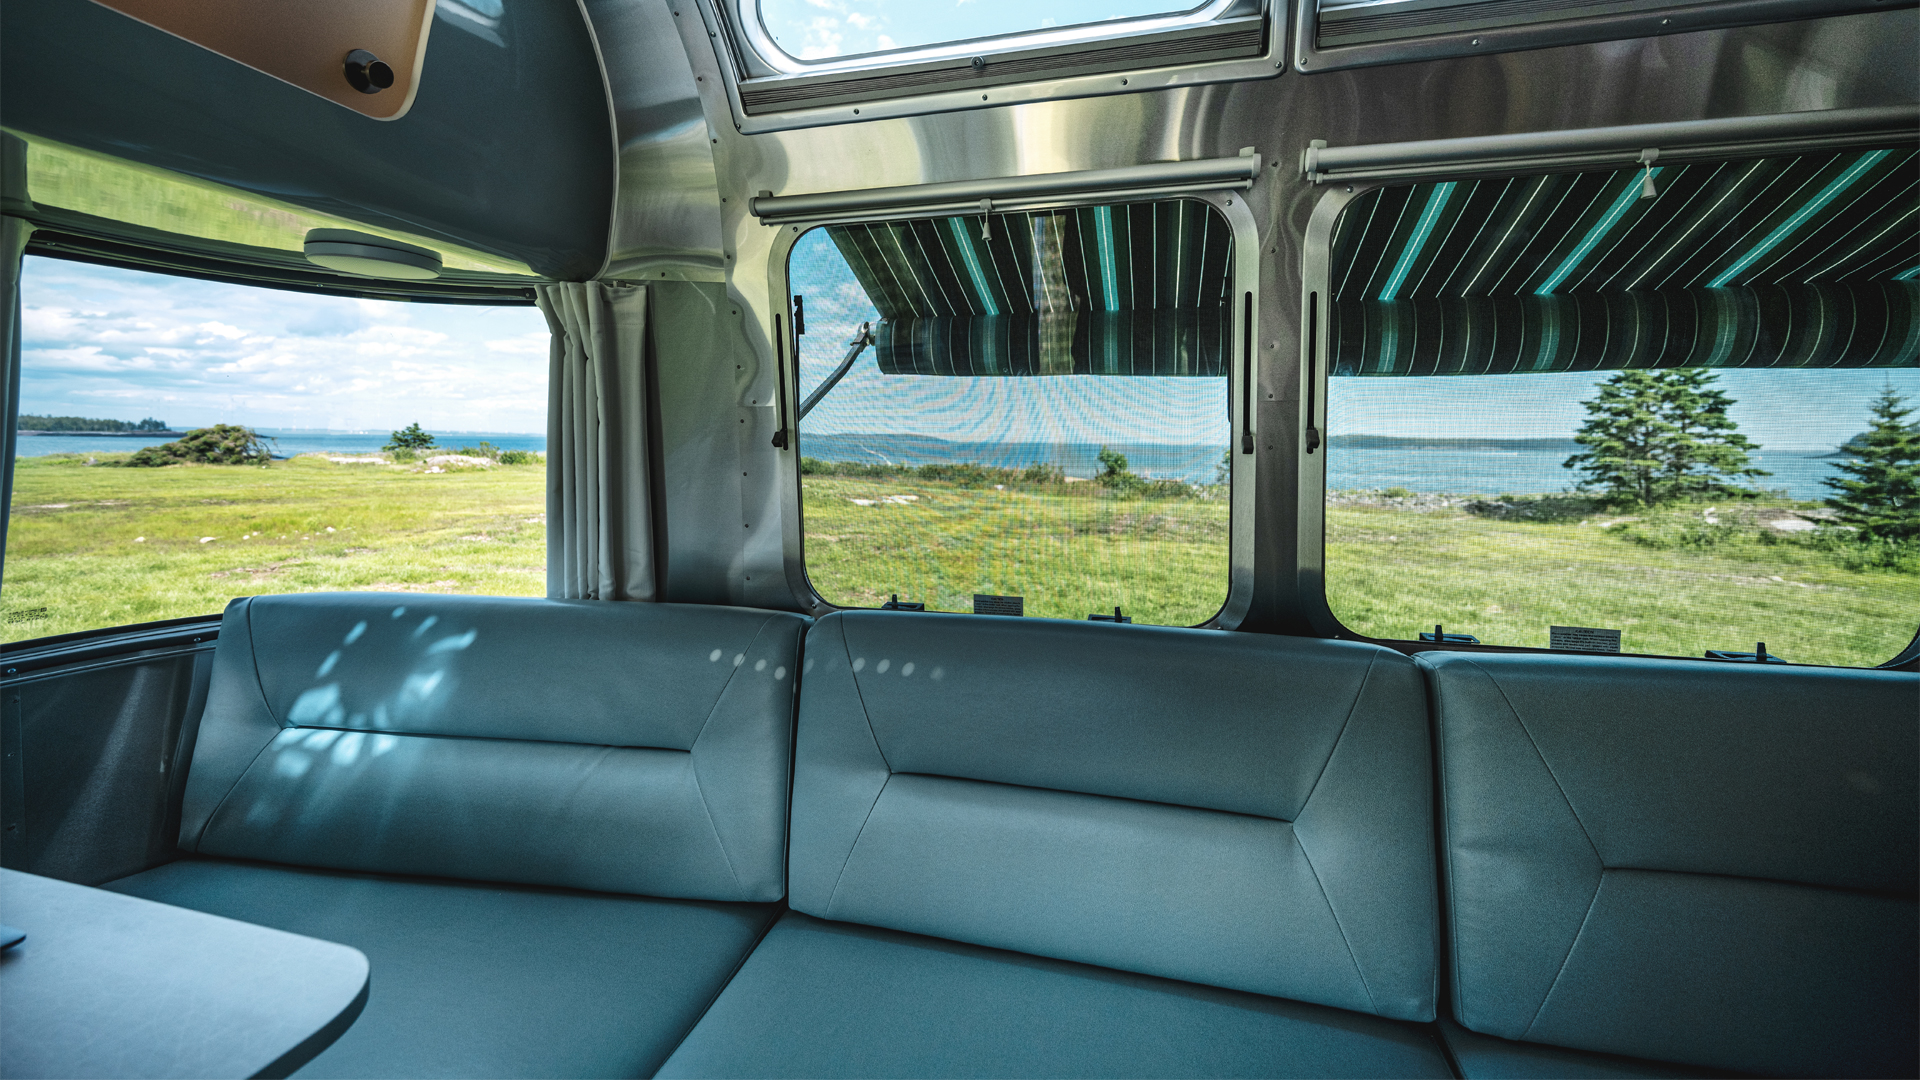 The ultraleather seating in an Airstream International travel trailer